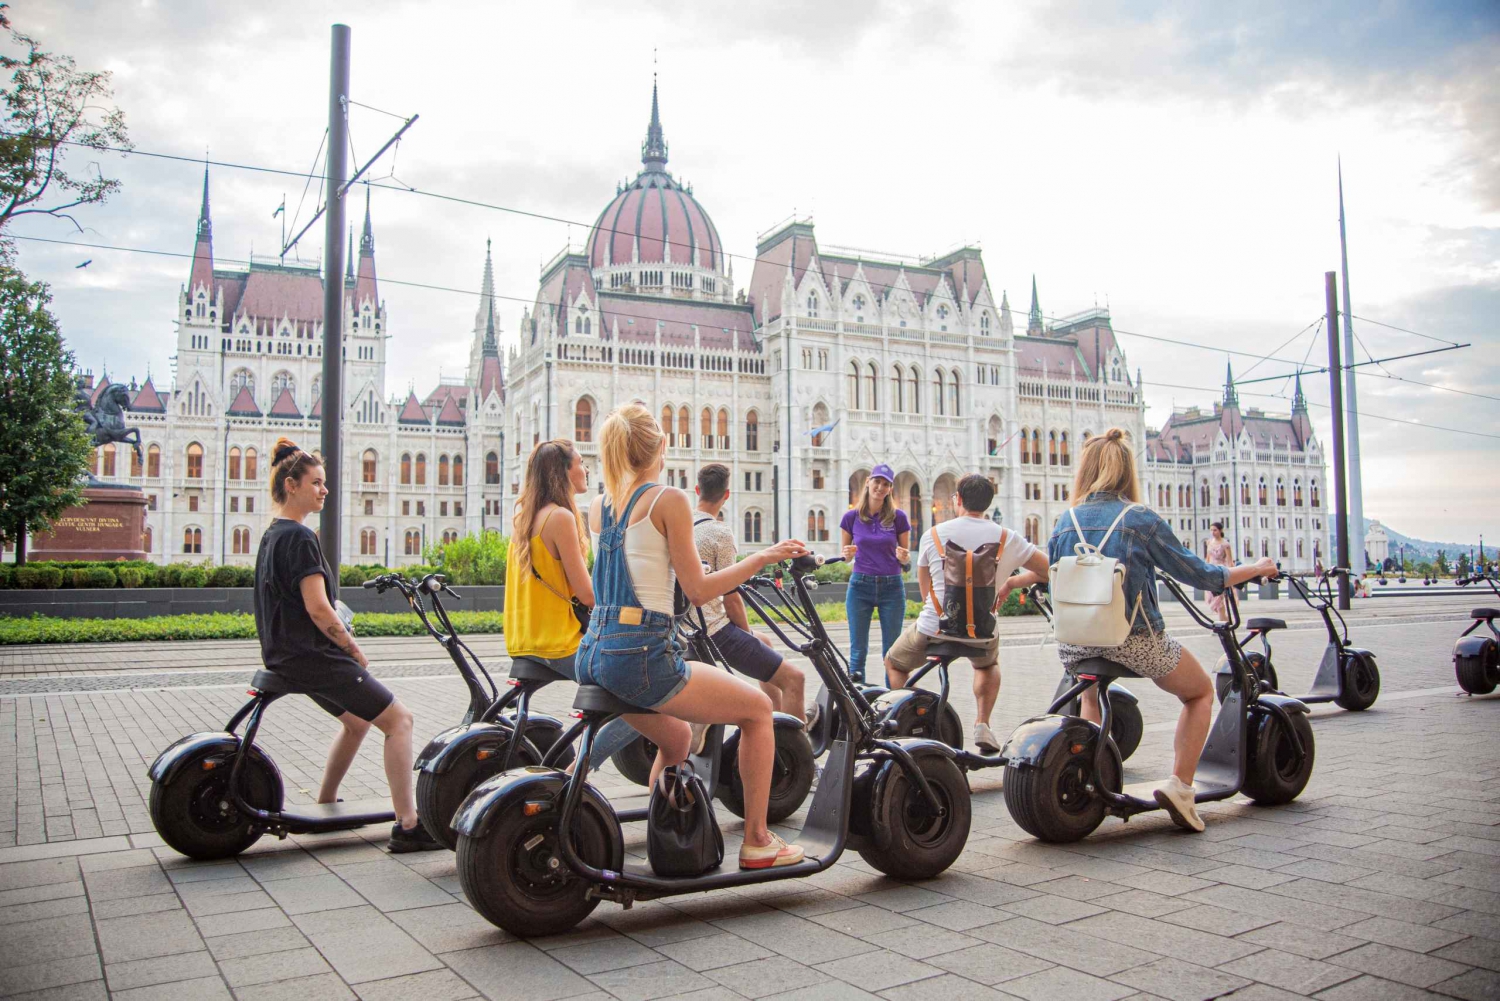 Top sights of Pest downtown on e-scooters incl. Parliament